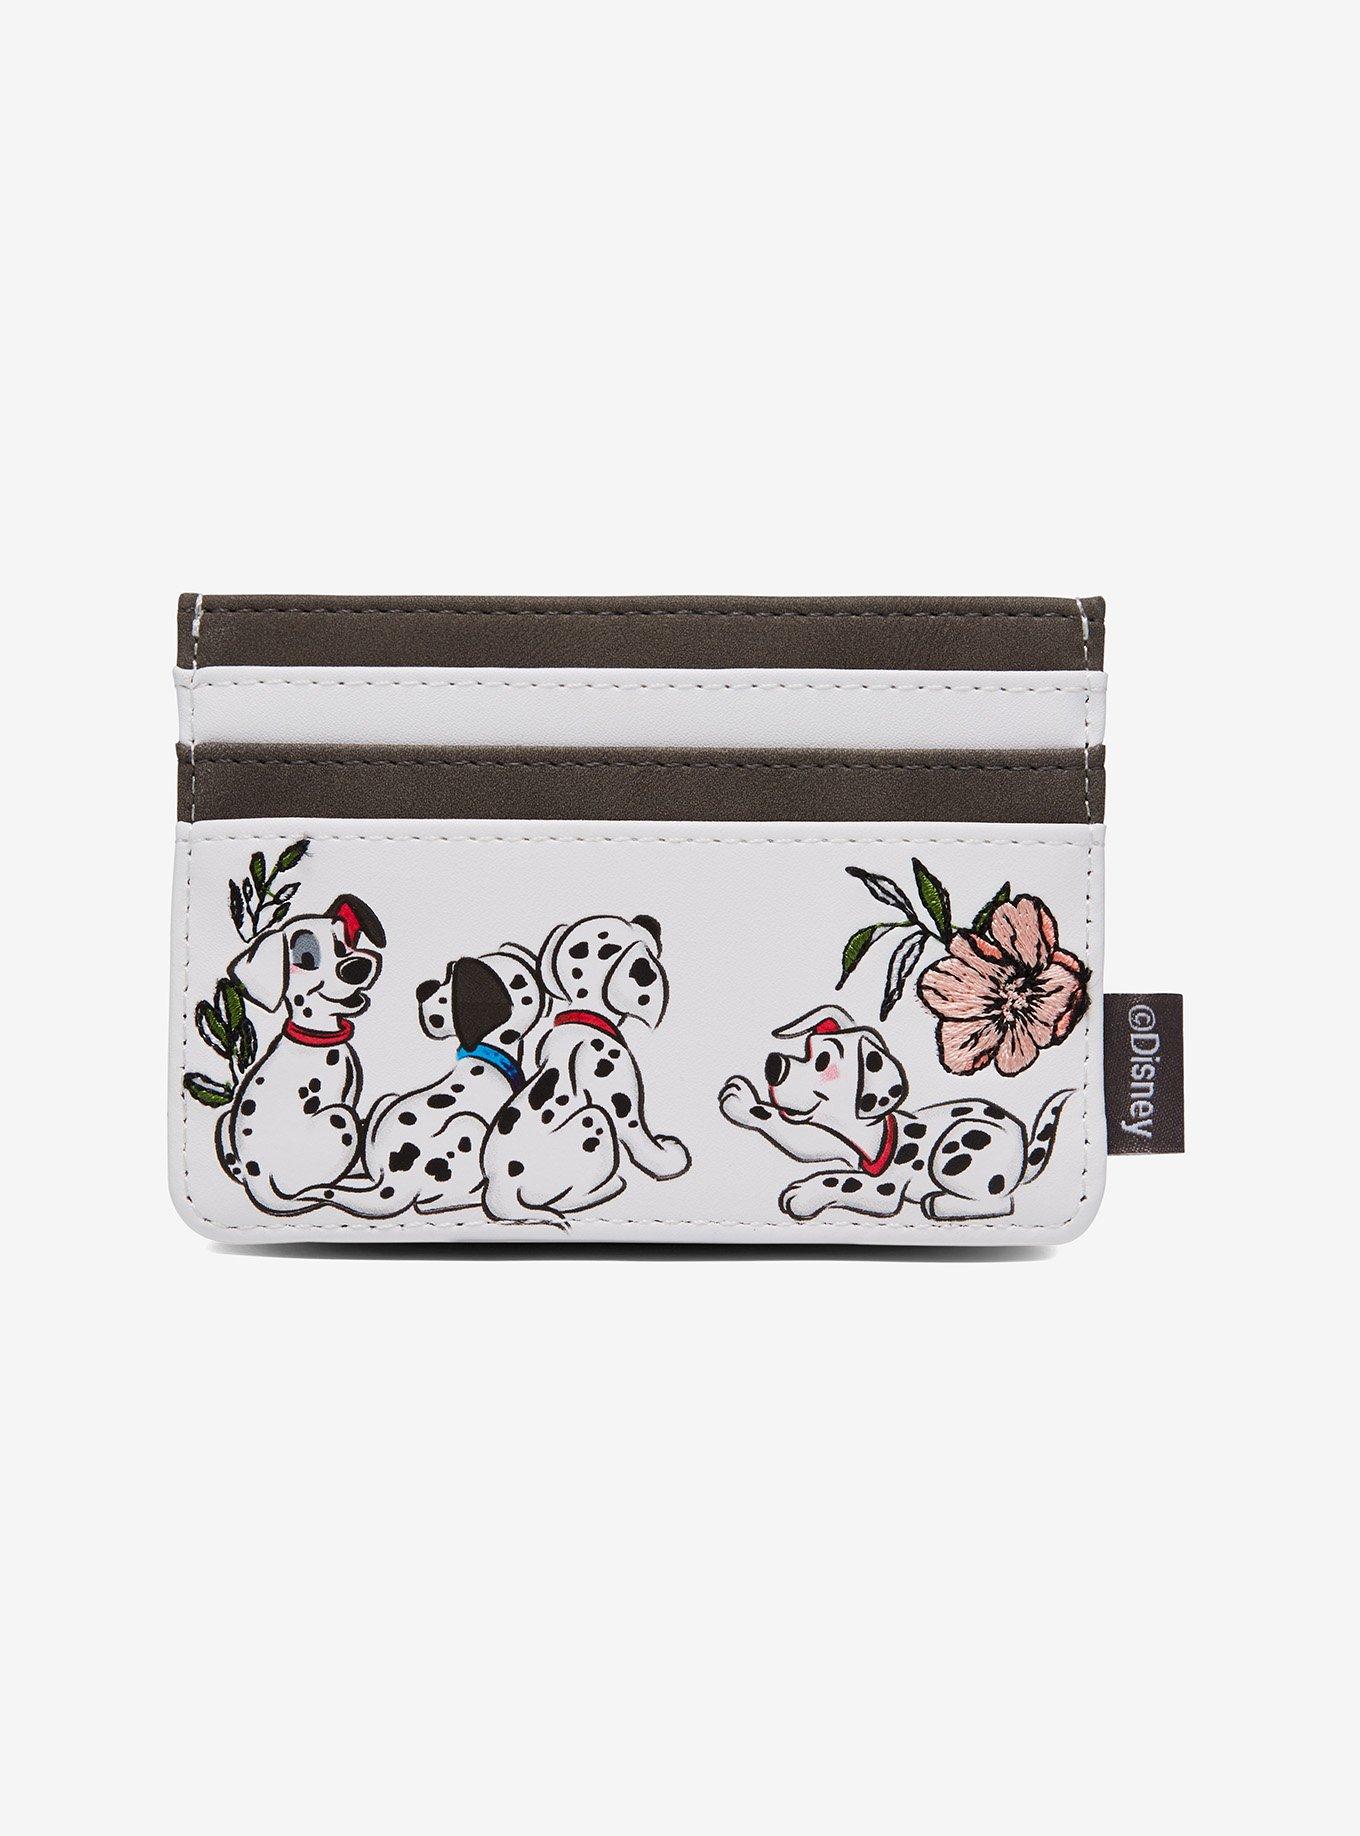 Wallet ID Card Holder - Mickey Mouse Expression Blocks White Black Red